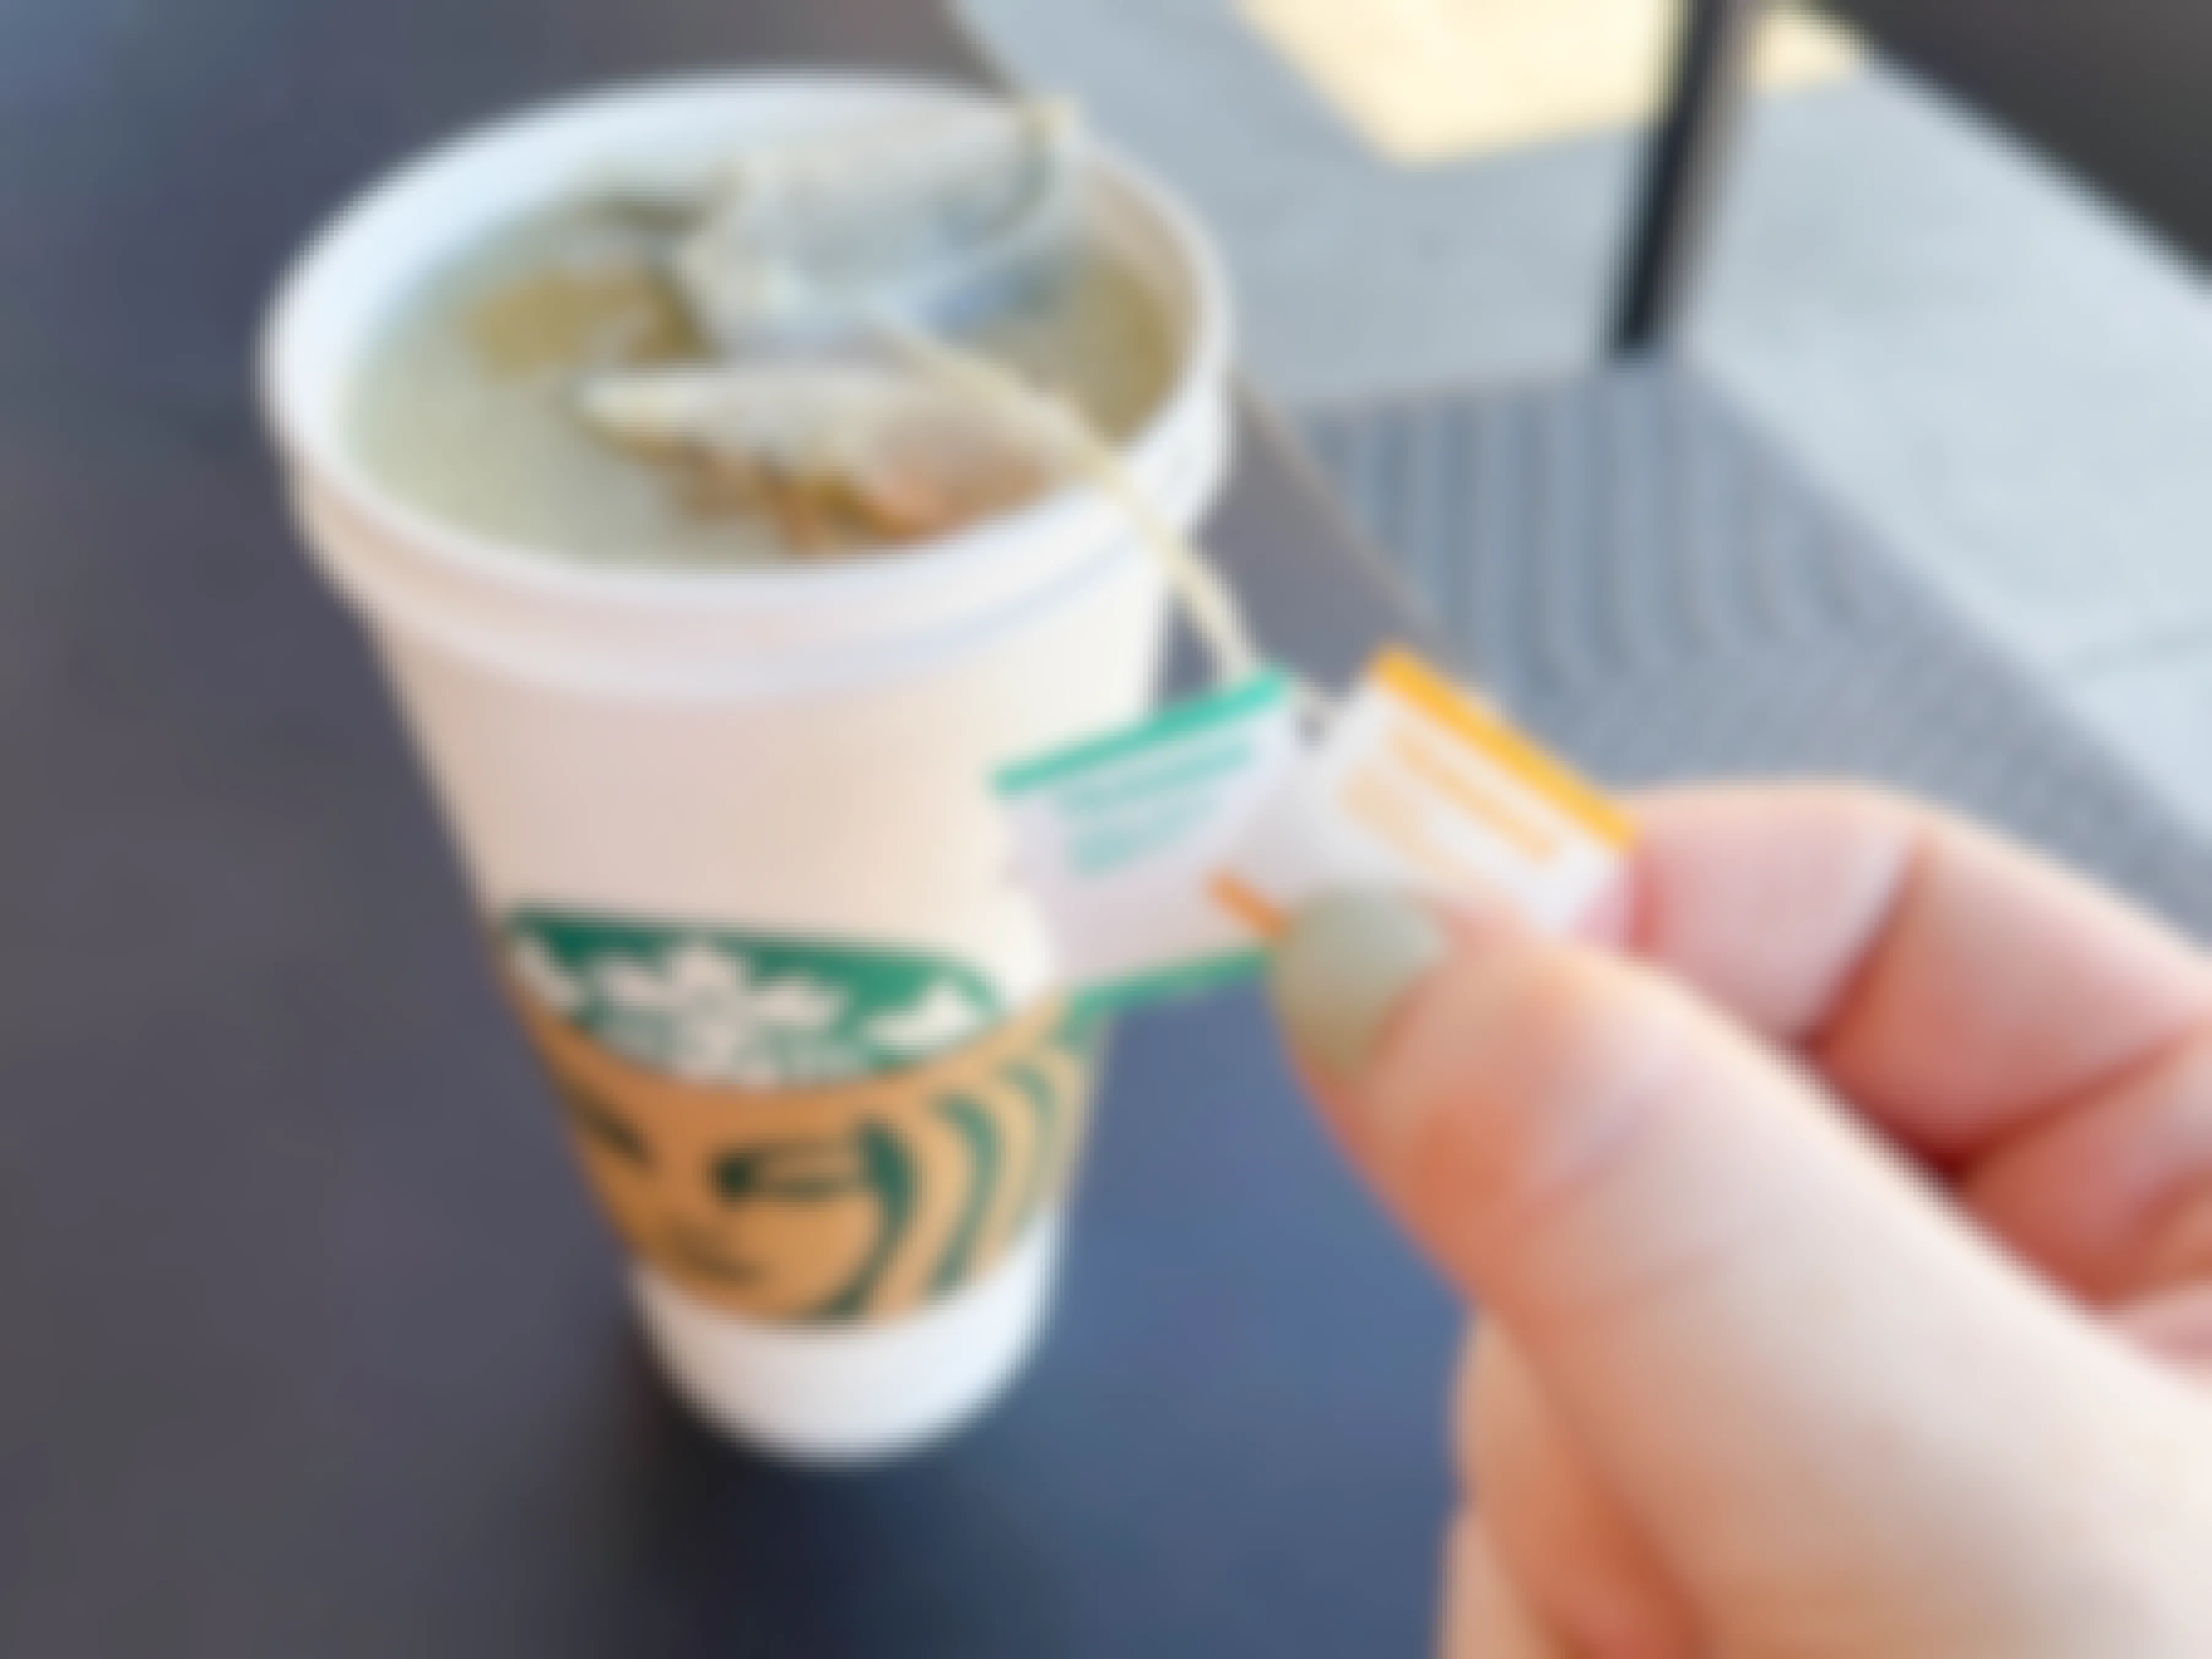 A Starbucks tea sitting on a table with the tea bags labels being held up.